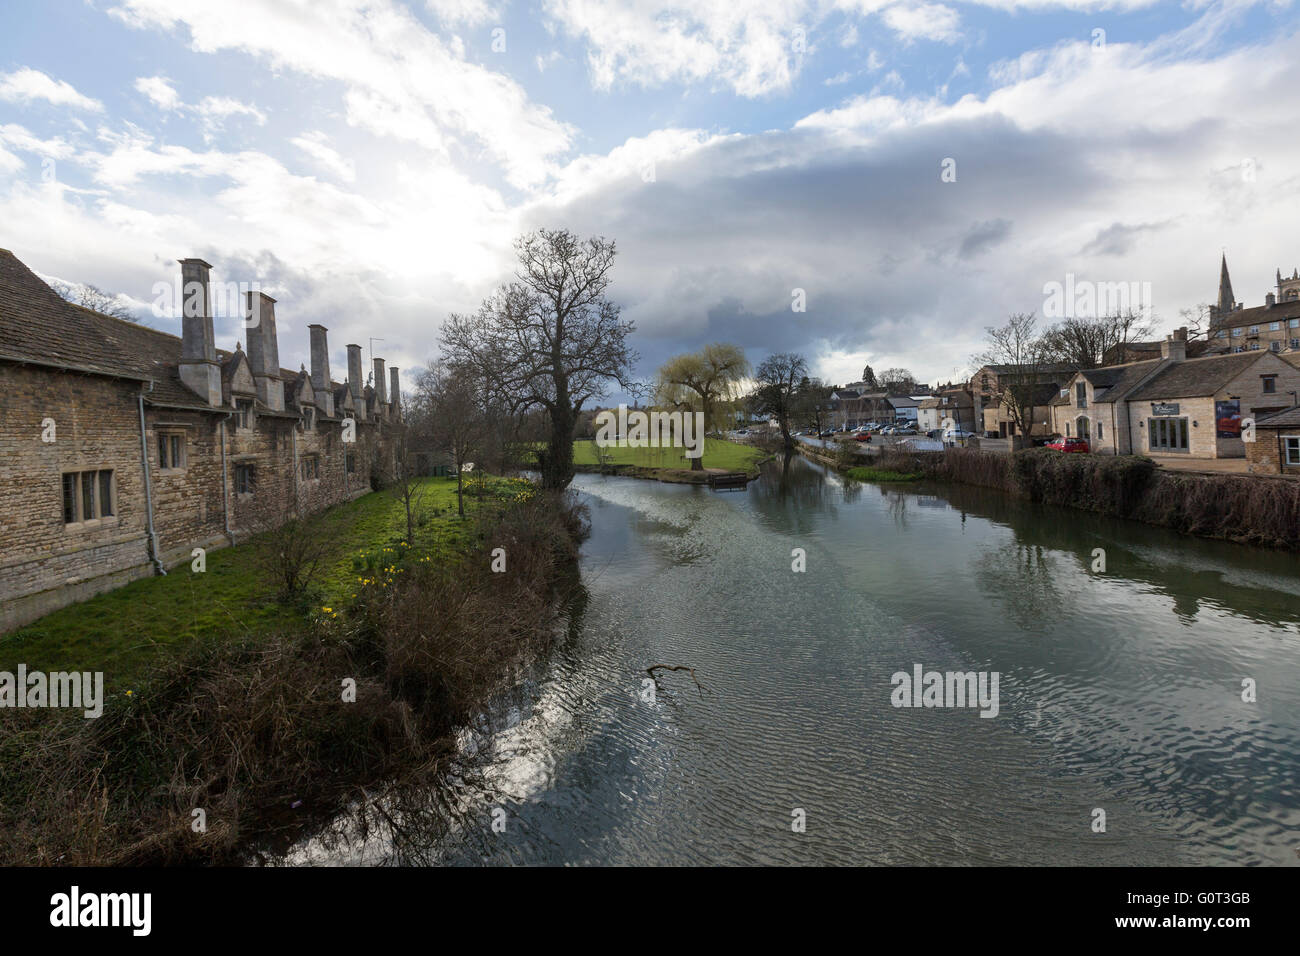 View from St Mary's Bridge of Lord Burghley's Hospital and River Welland, Stamford, Lincolnshire, England, Stock Photo